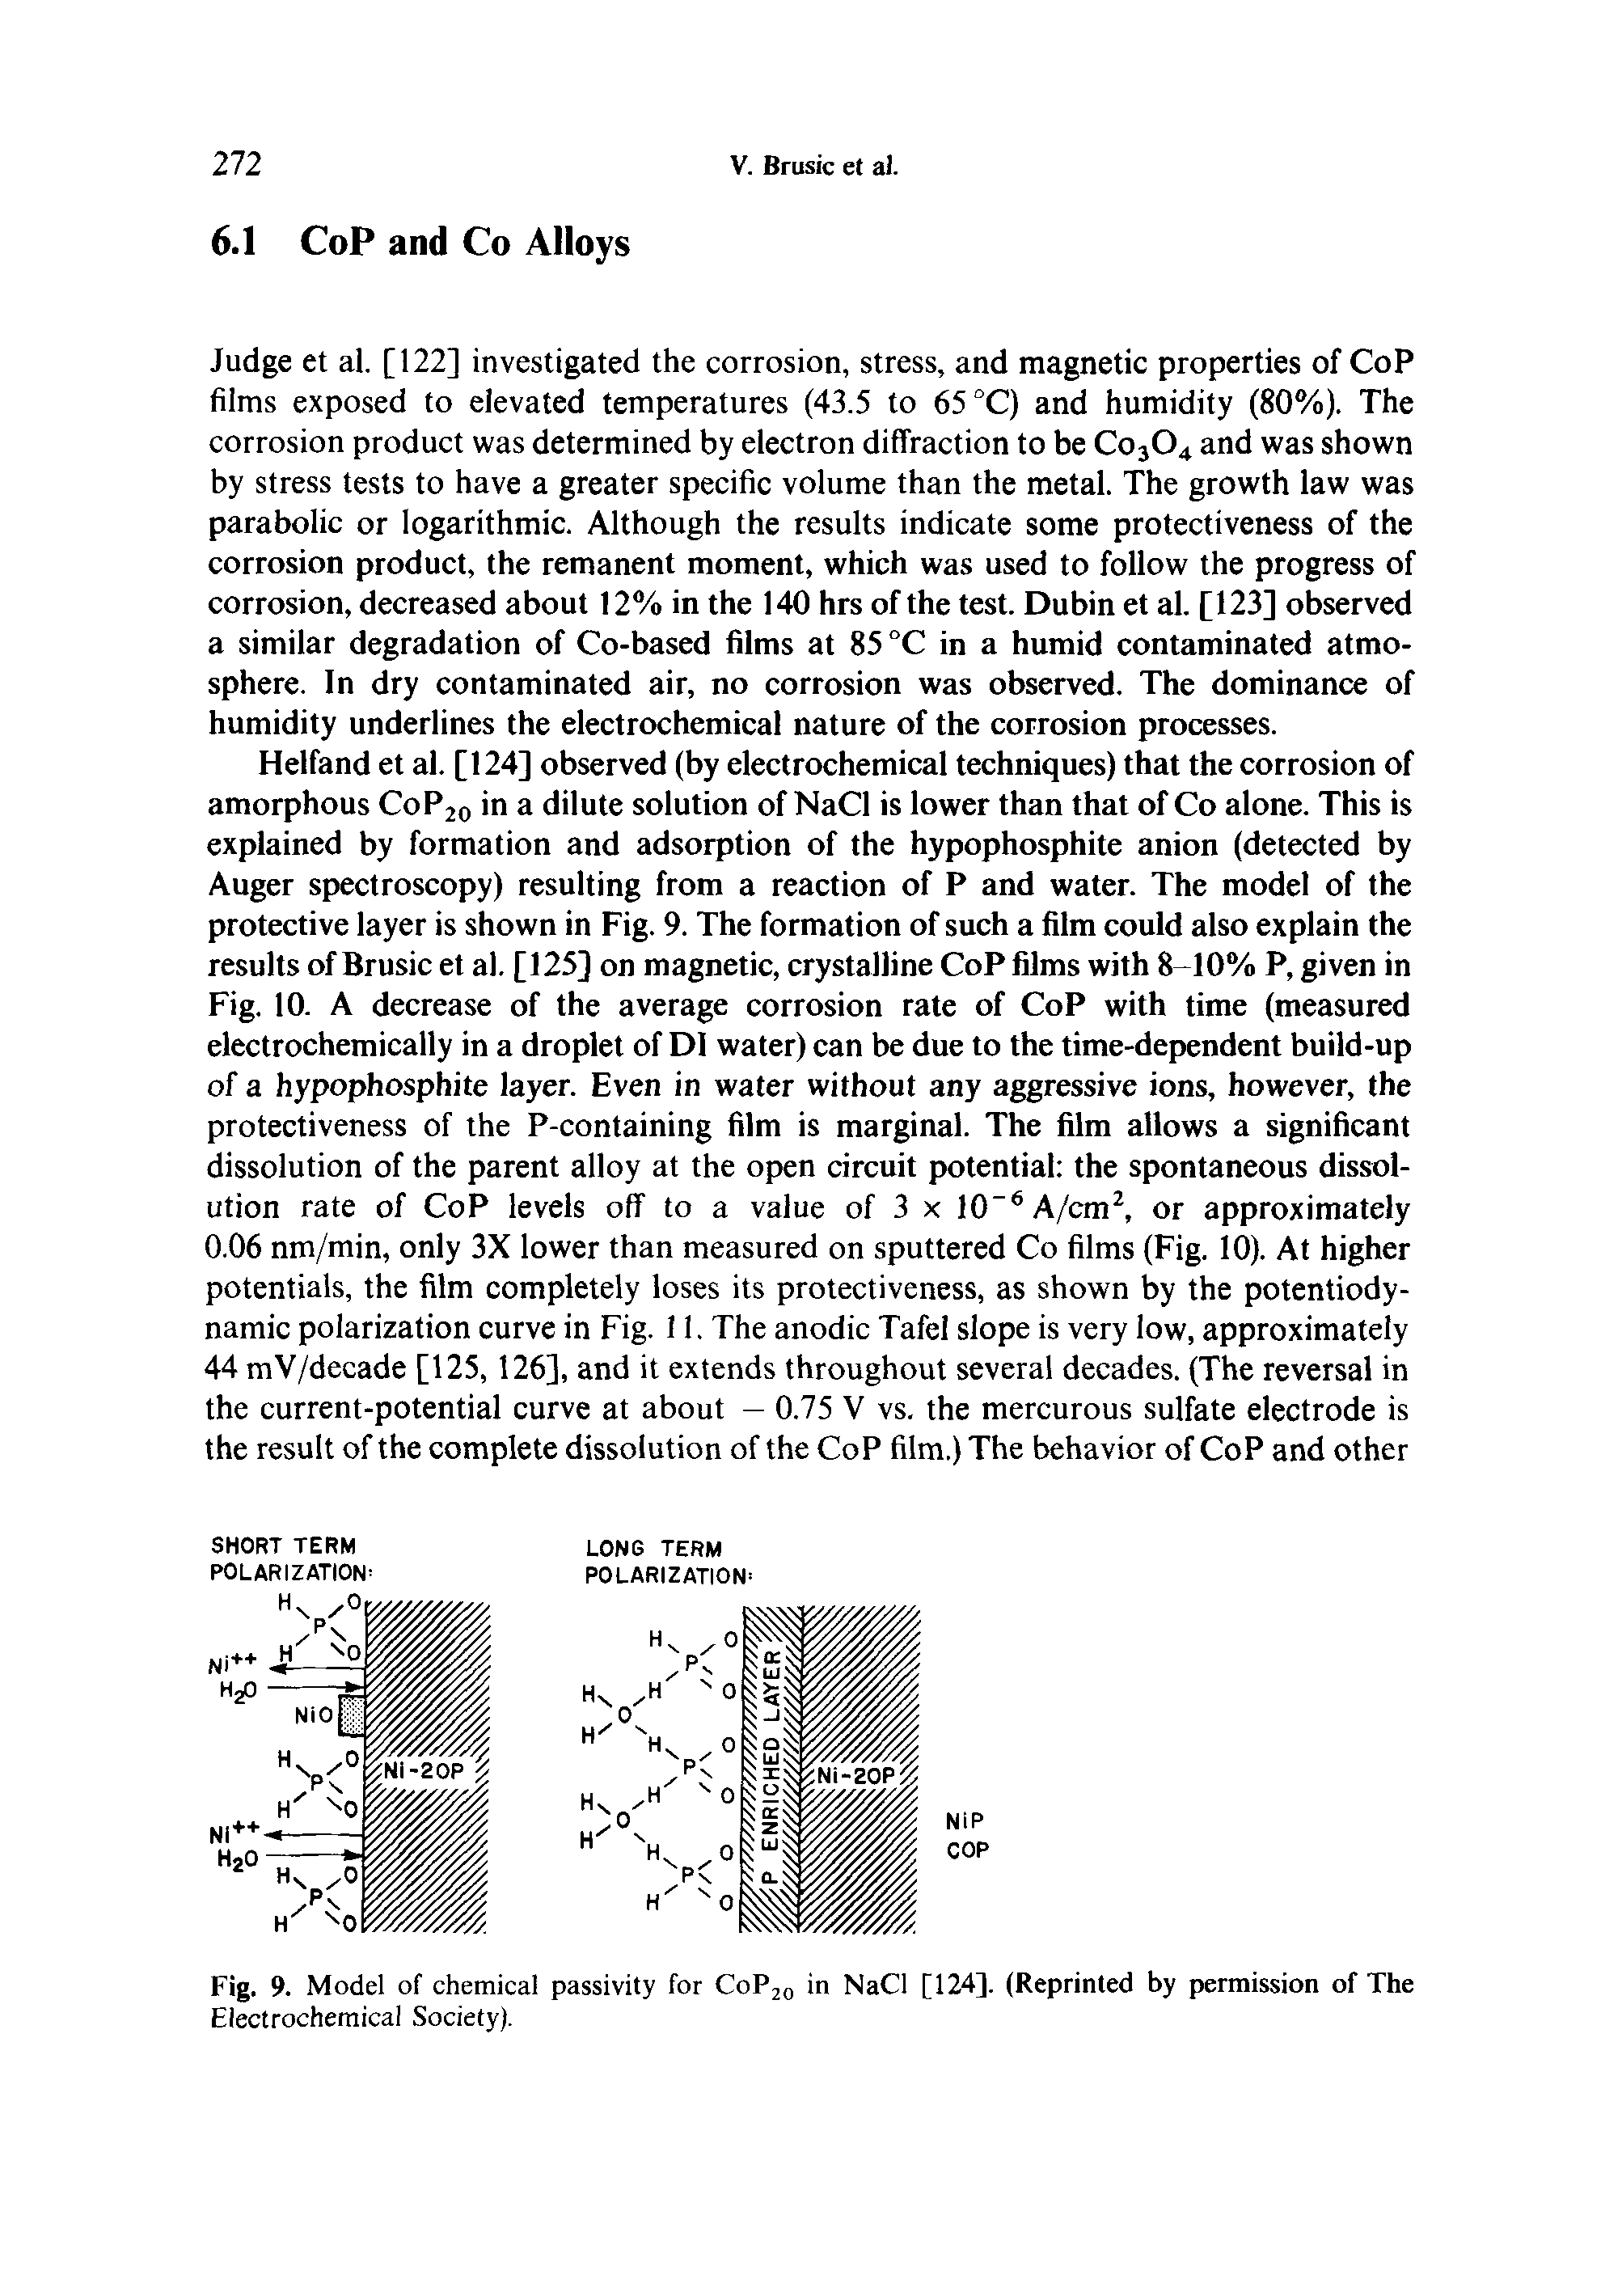 Fig. 9. Model of chemical passivity for CoP20 in NaCl [124]. (Reprinted by permission of The Electrochemical Society).